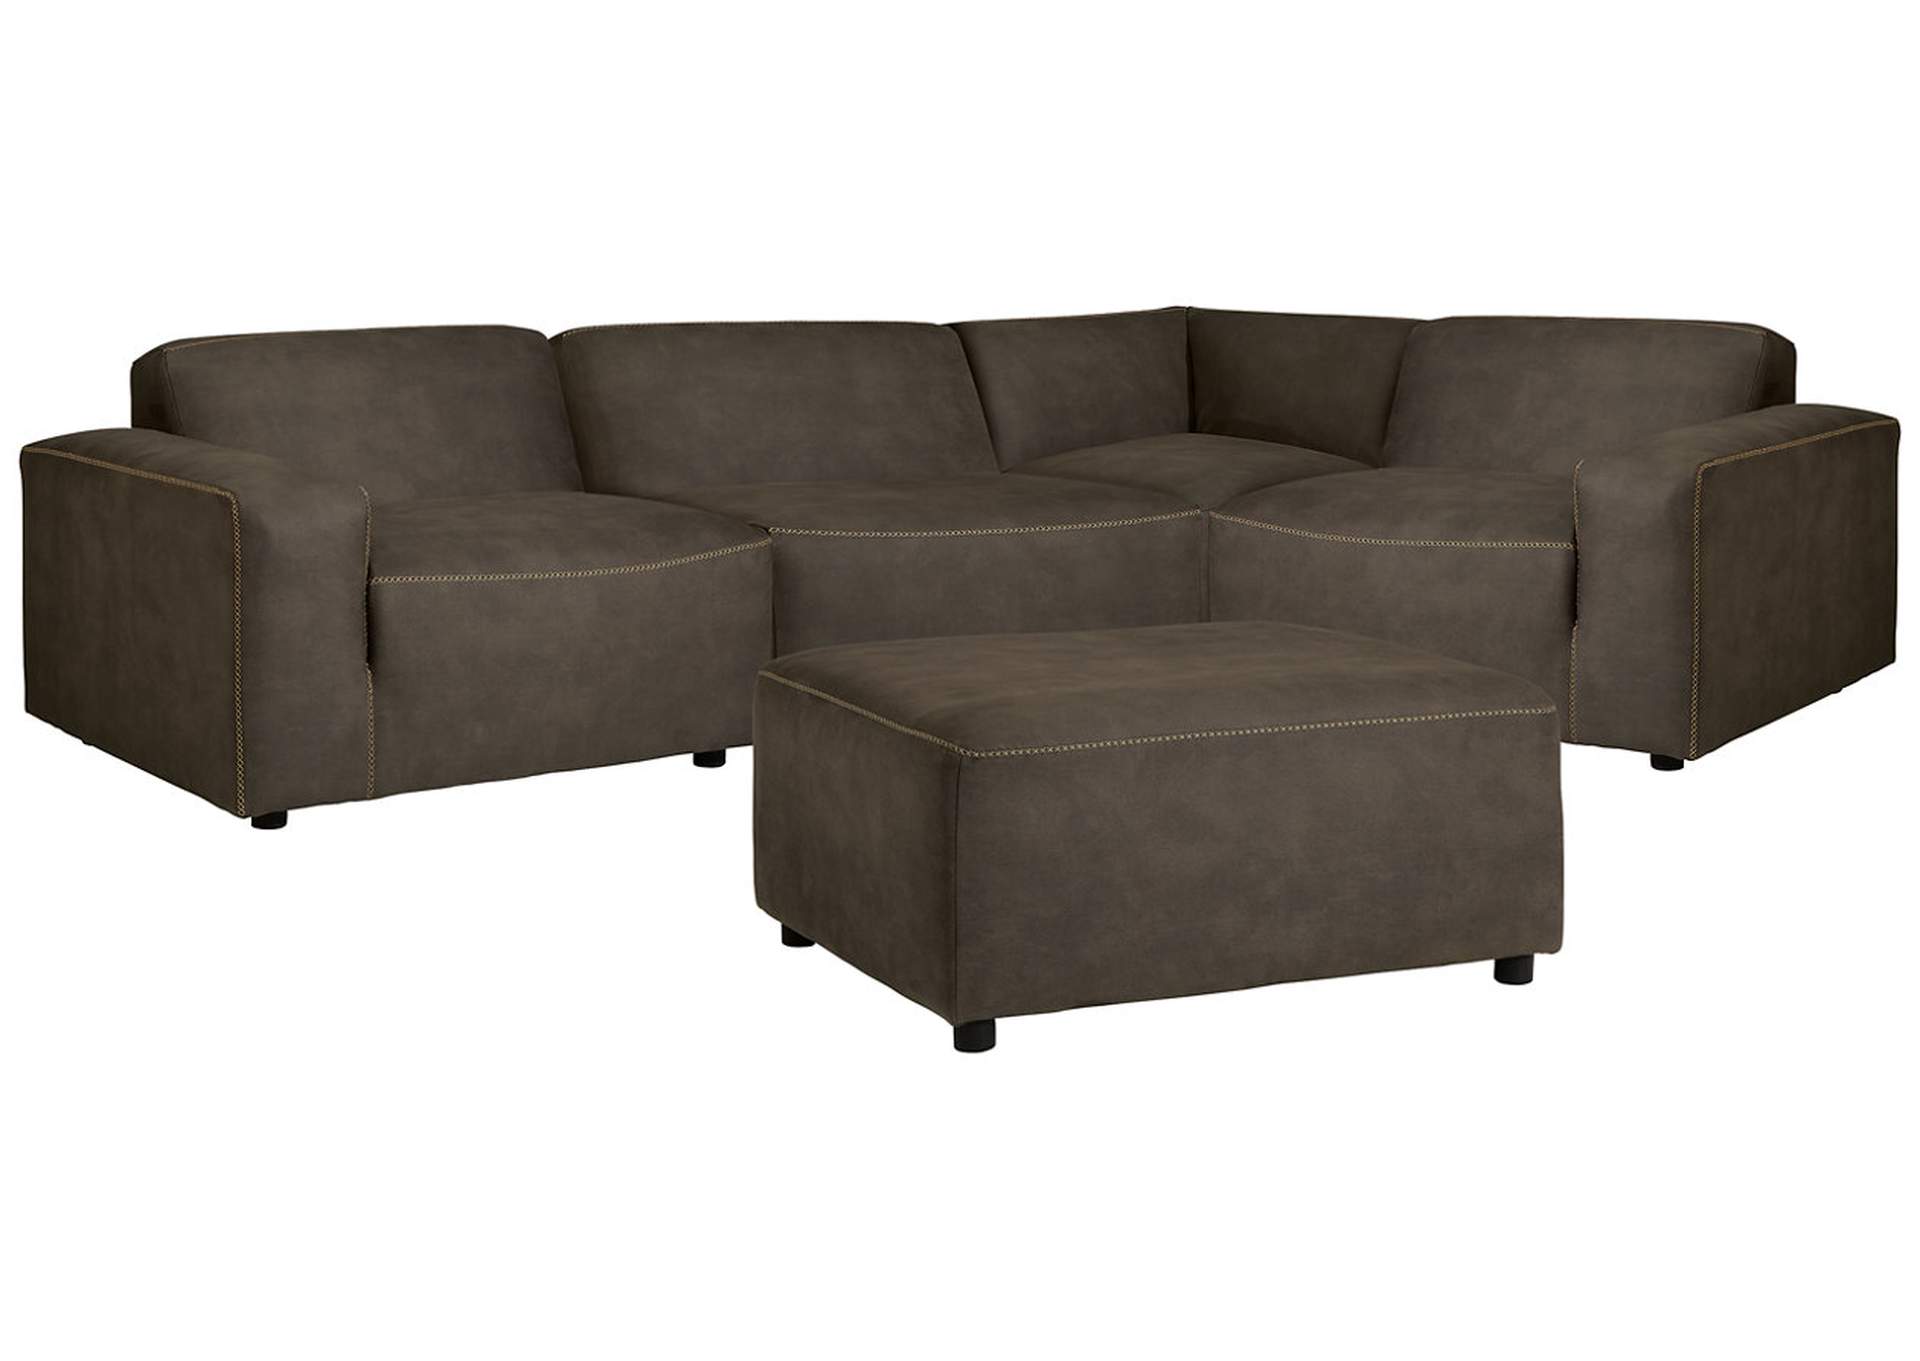 Allena 4-Piece Sectional with Ottoman,Signature Design By Ashley